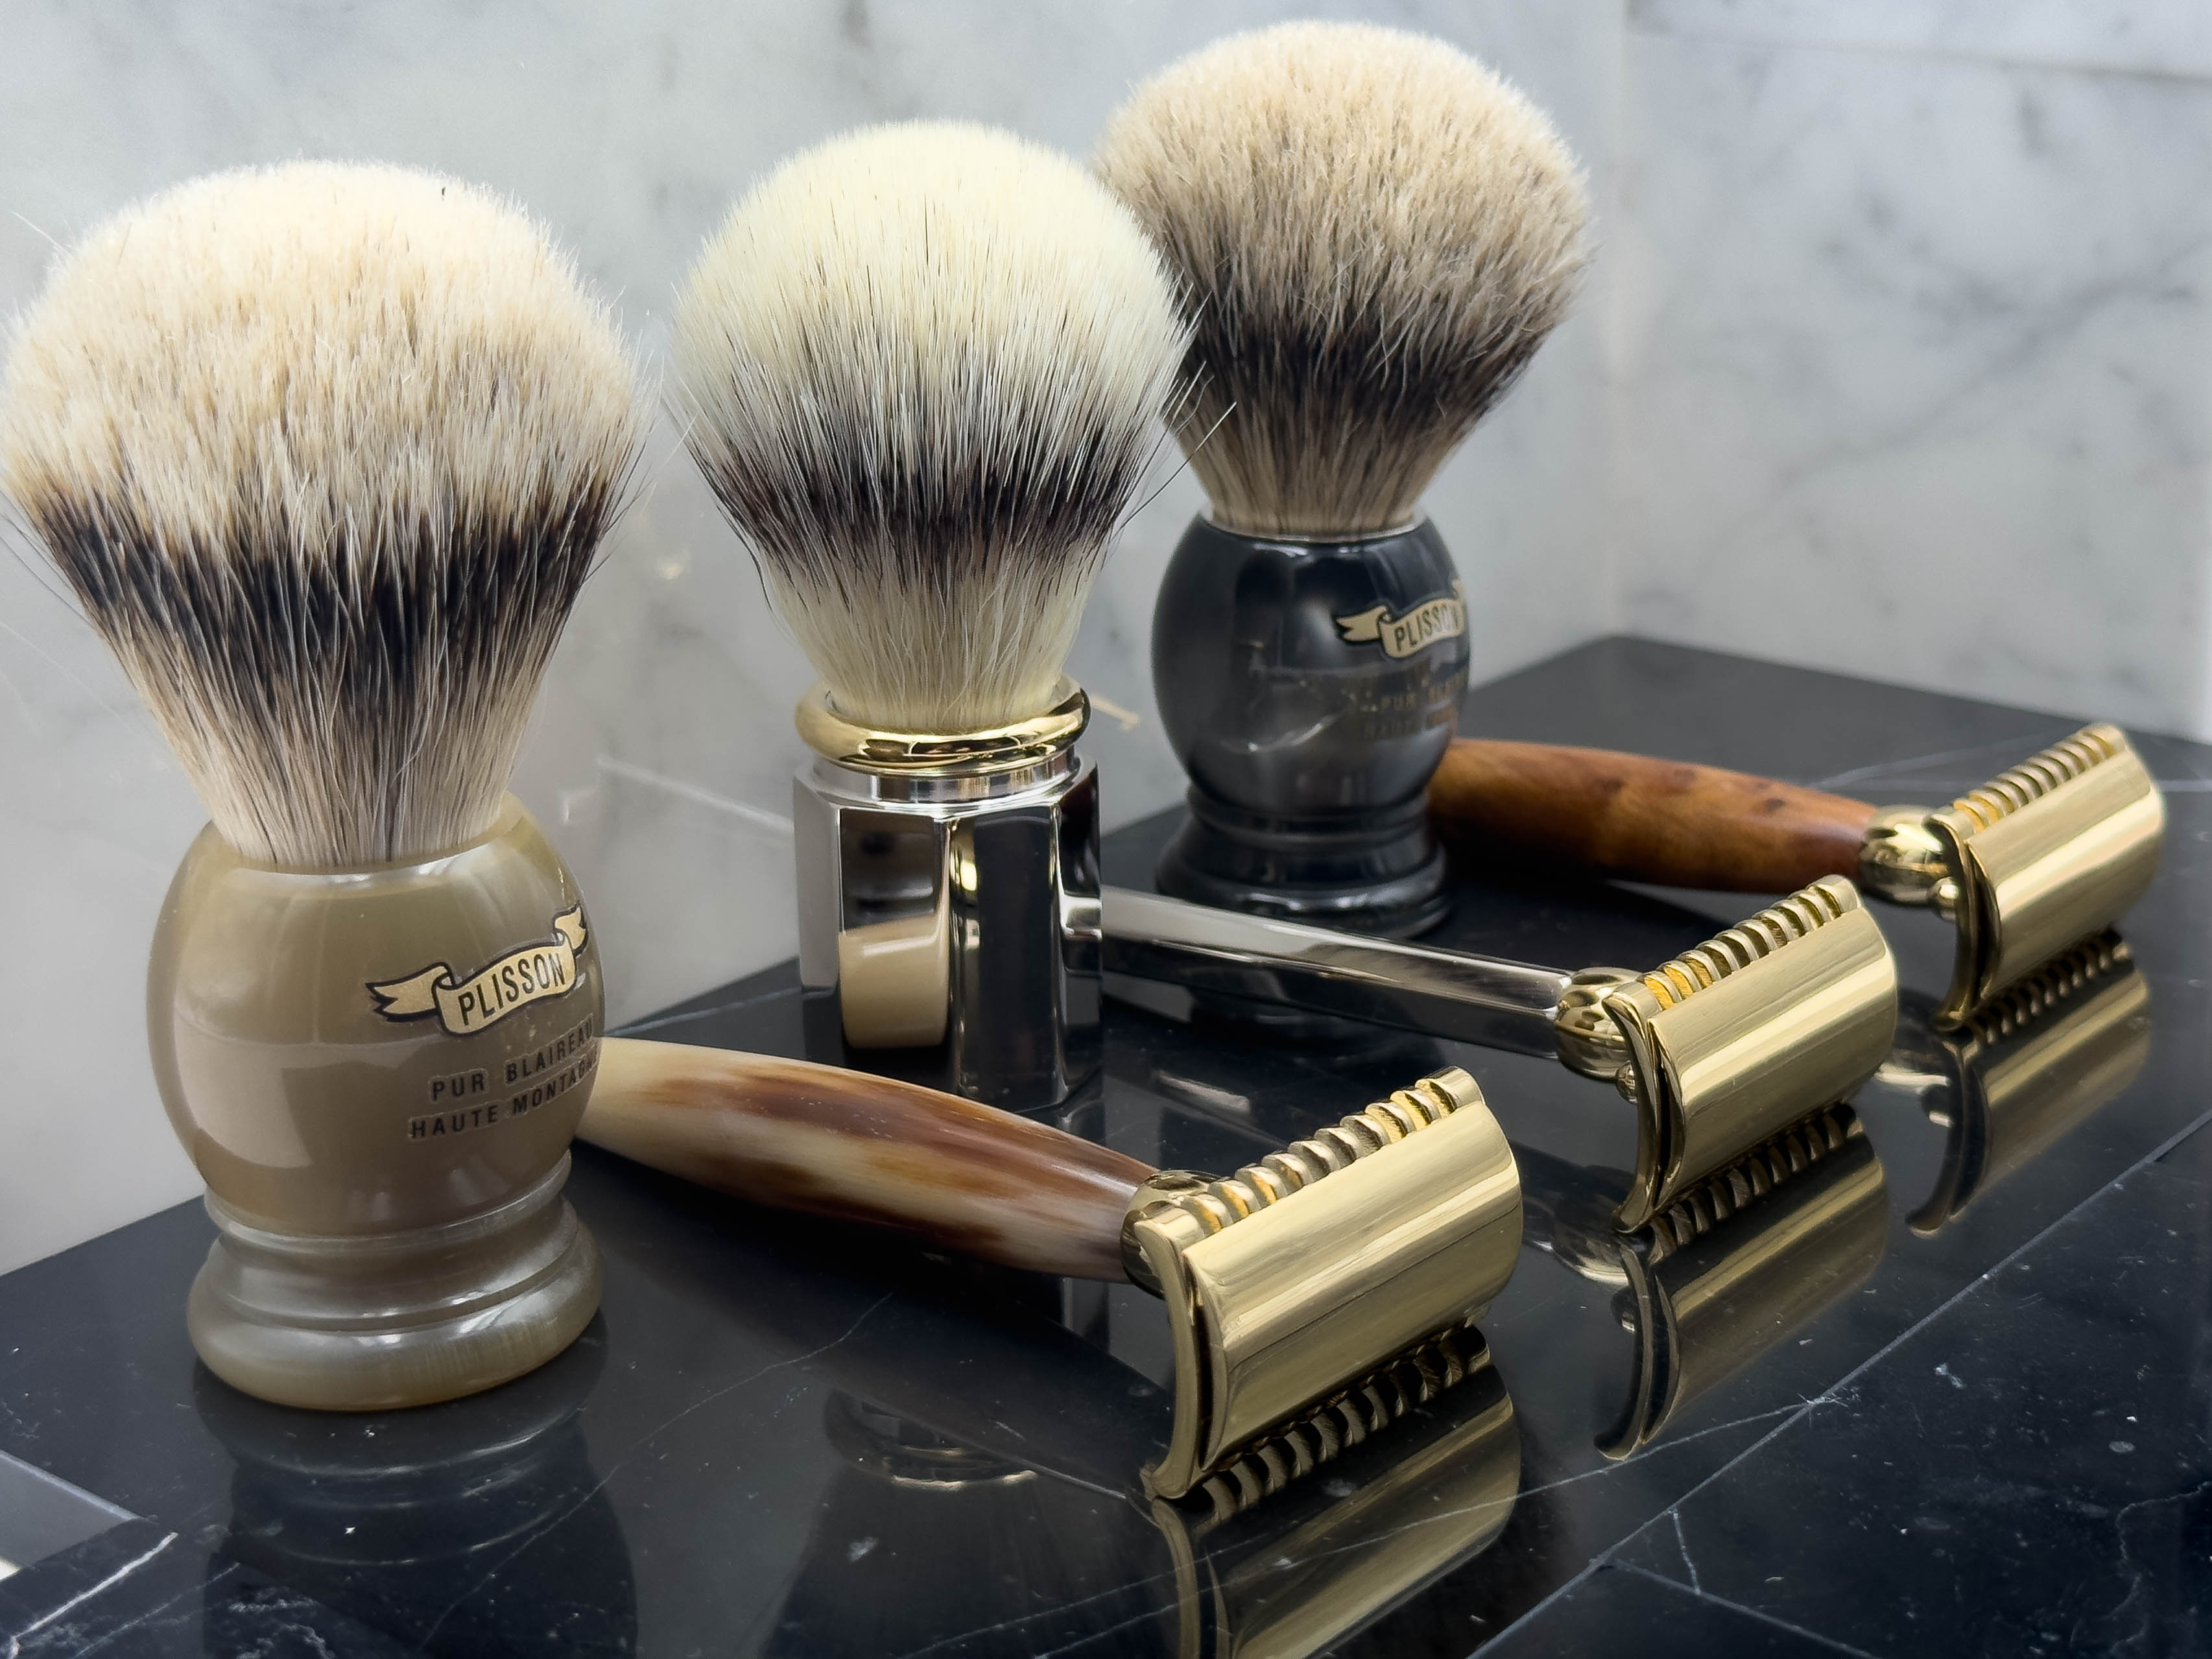 Plisson badgers and razors on marble